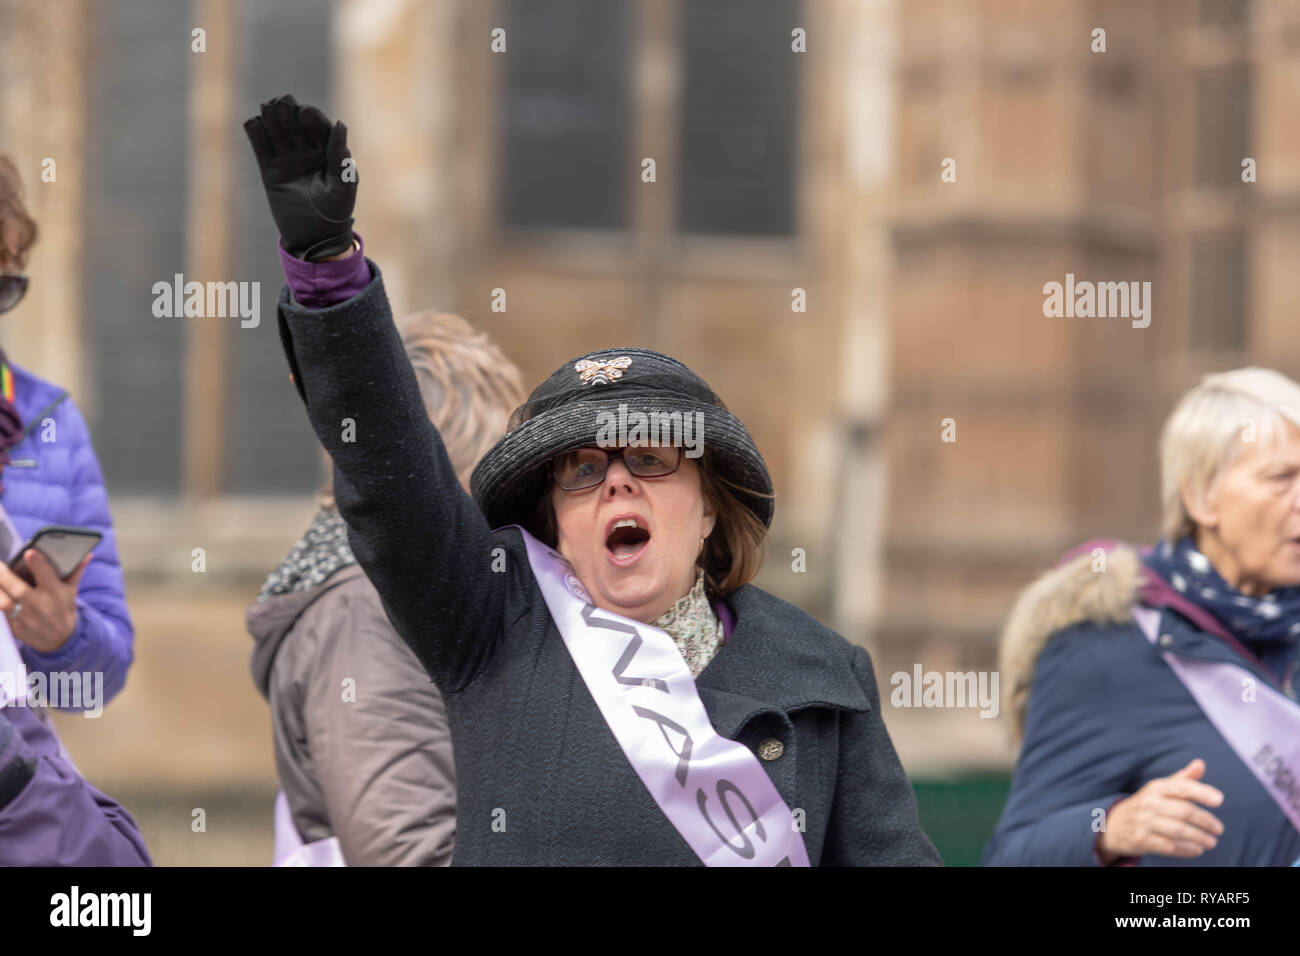 London 13th March 2019 Women against State Pension Inequlity (WASPI) protest outside the House of Commons on Spring Statement day about the move of the retirement age from 60 to 66 to introduce equality between male and female pensions  Credit: Ian Davidson/Alamy Live News Stock Photo